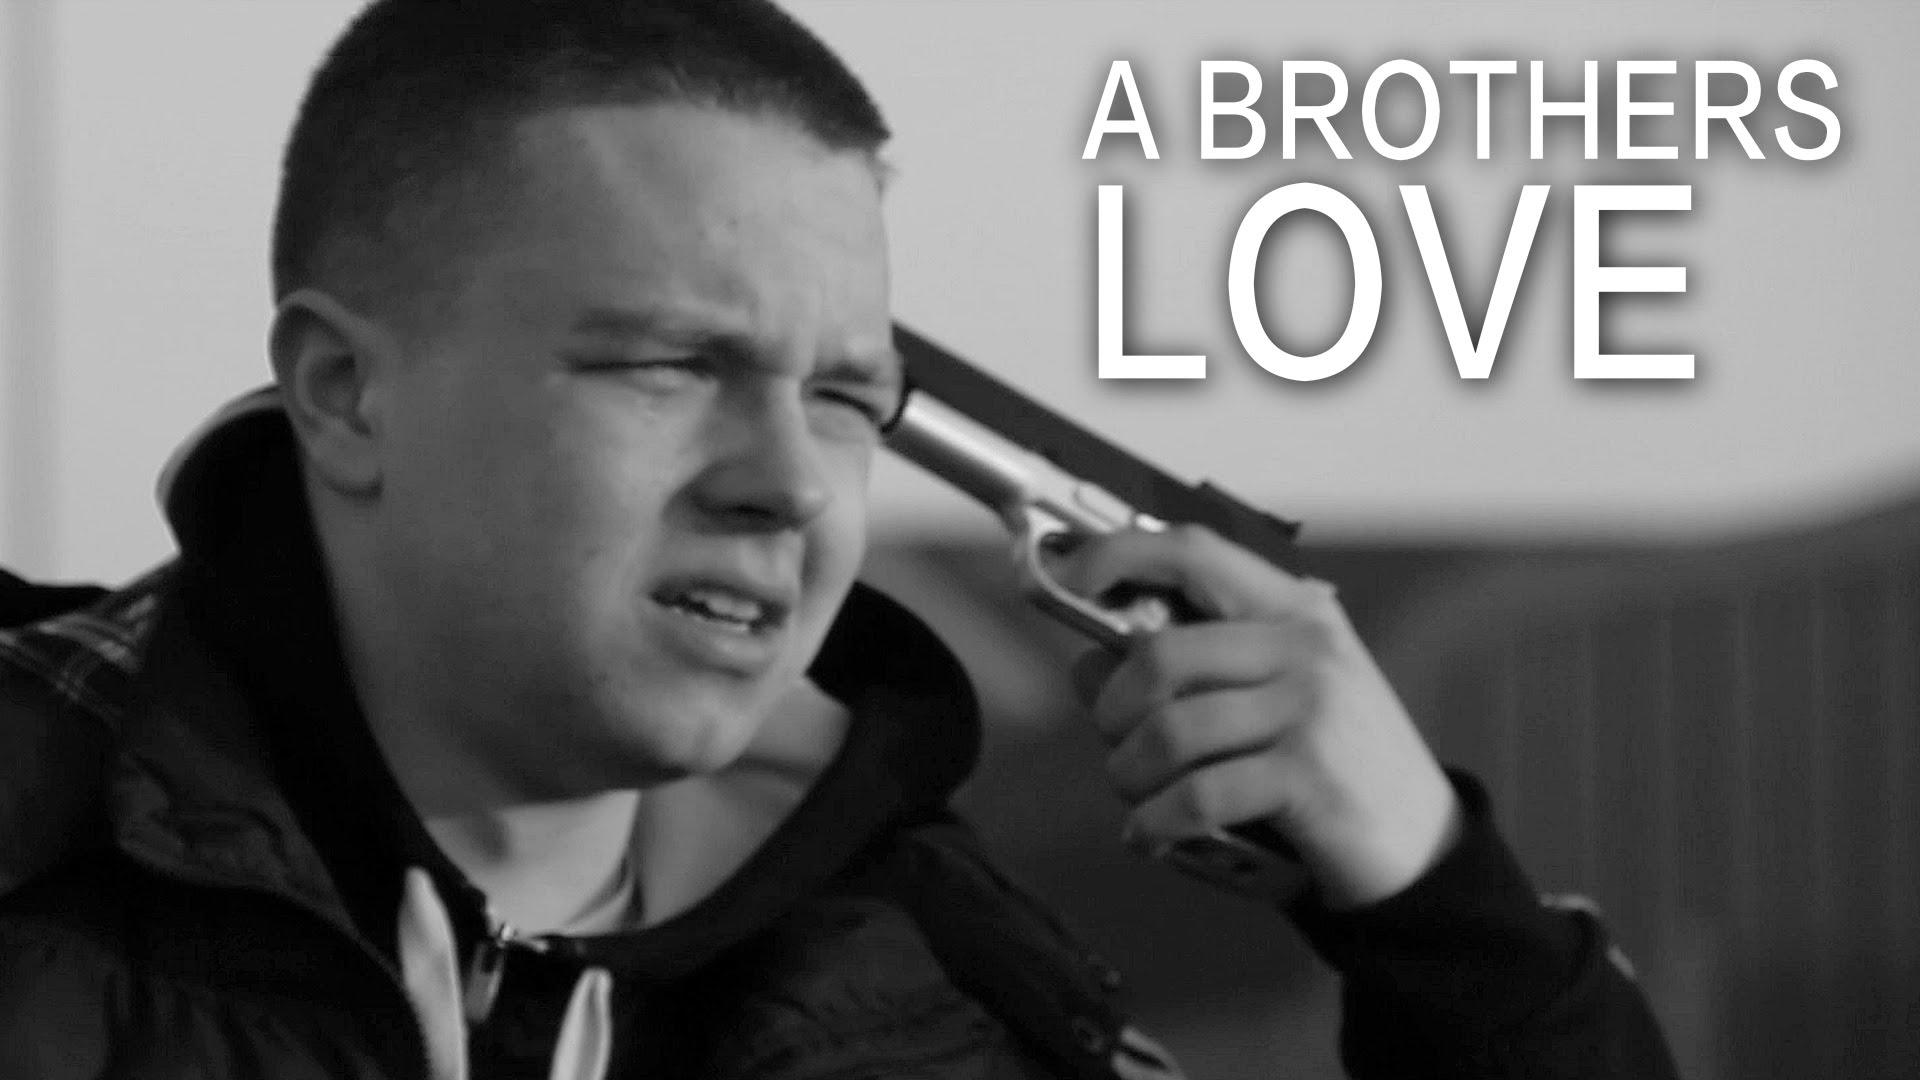 A Brothers Love / Short Gangsta film - YouTube